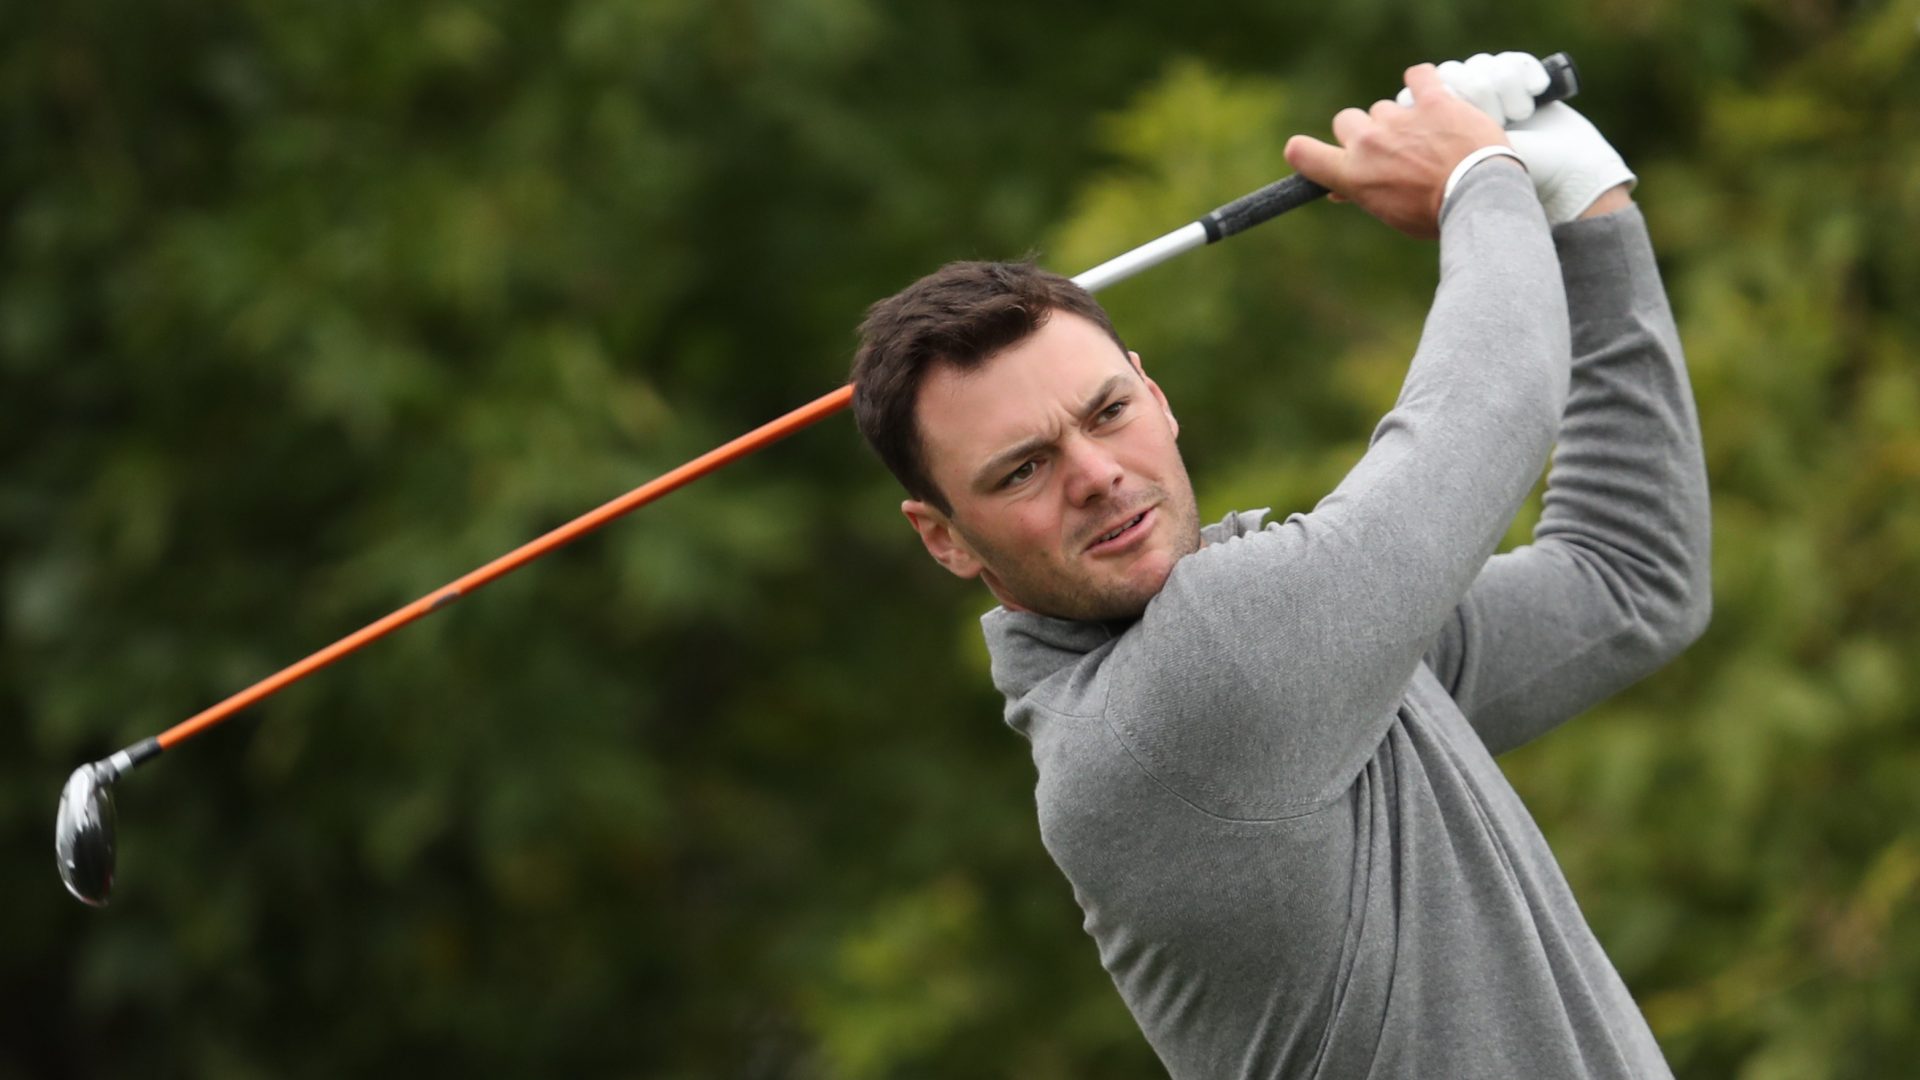 Martin Kaymer with the STRANGEST quote you could ever imagine...